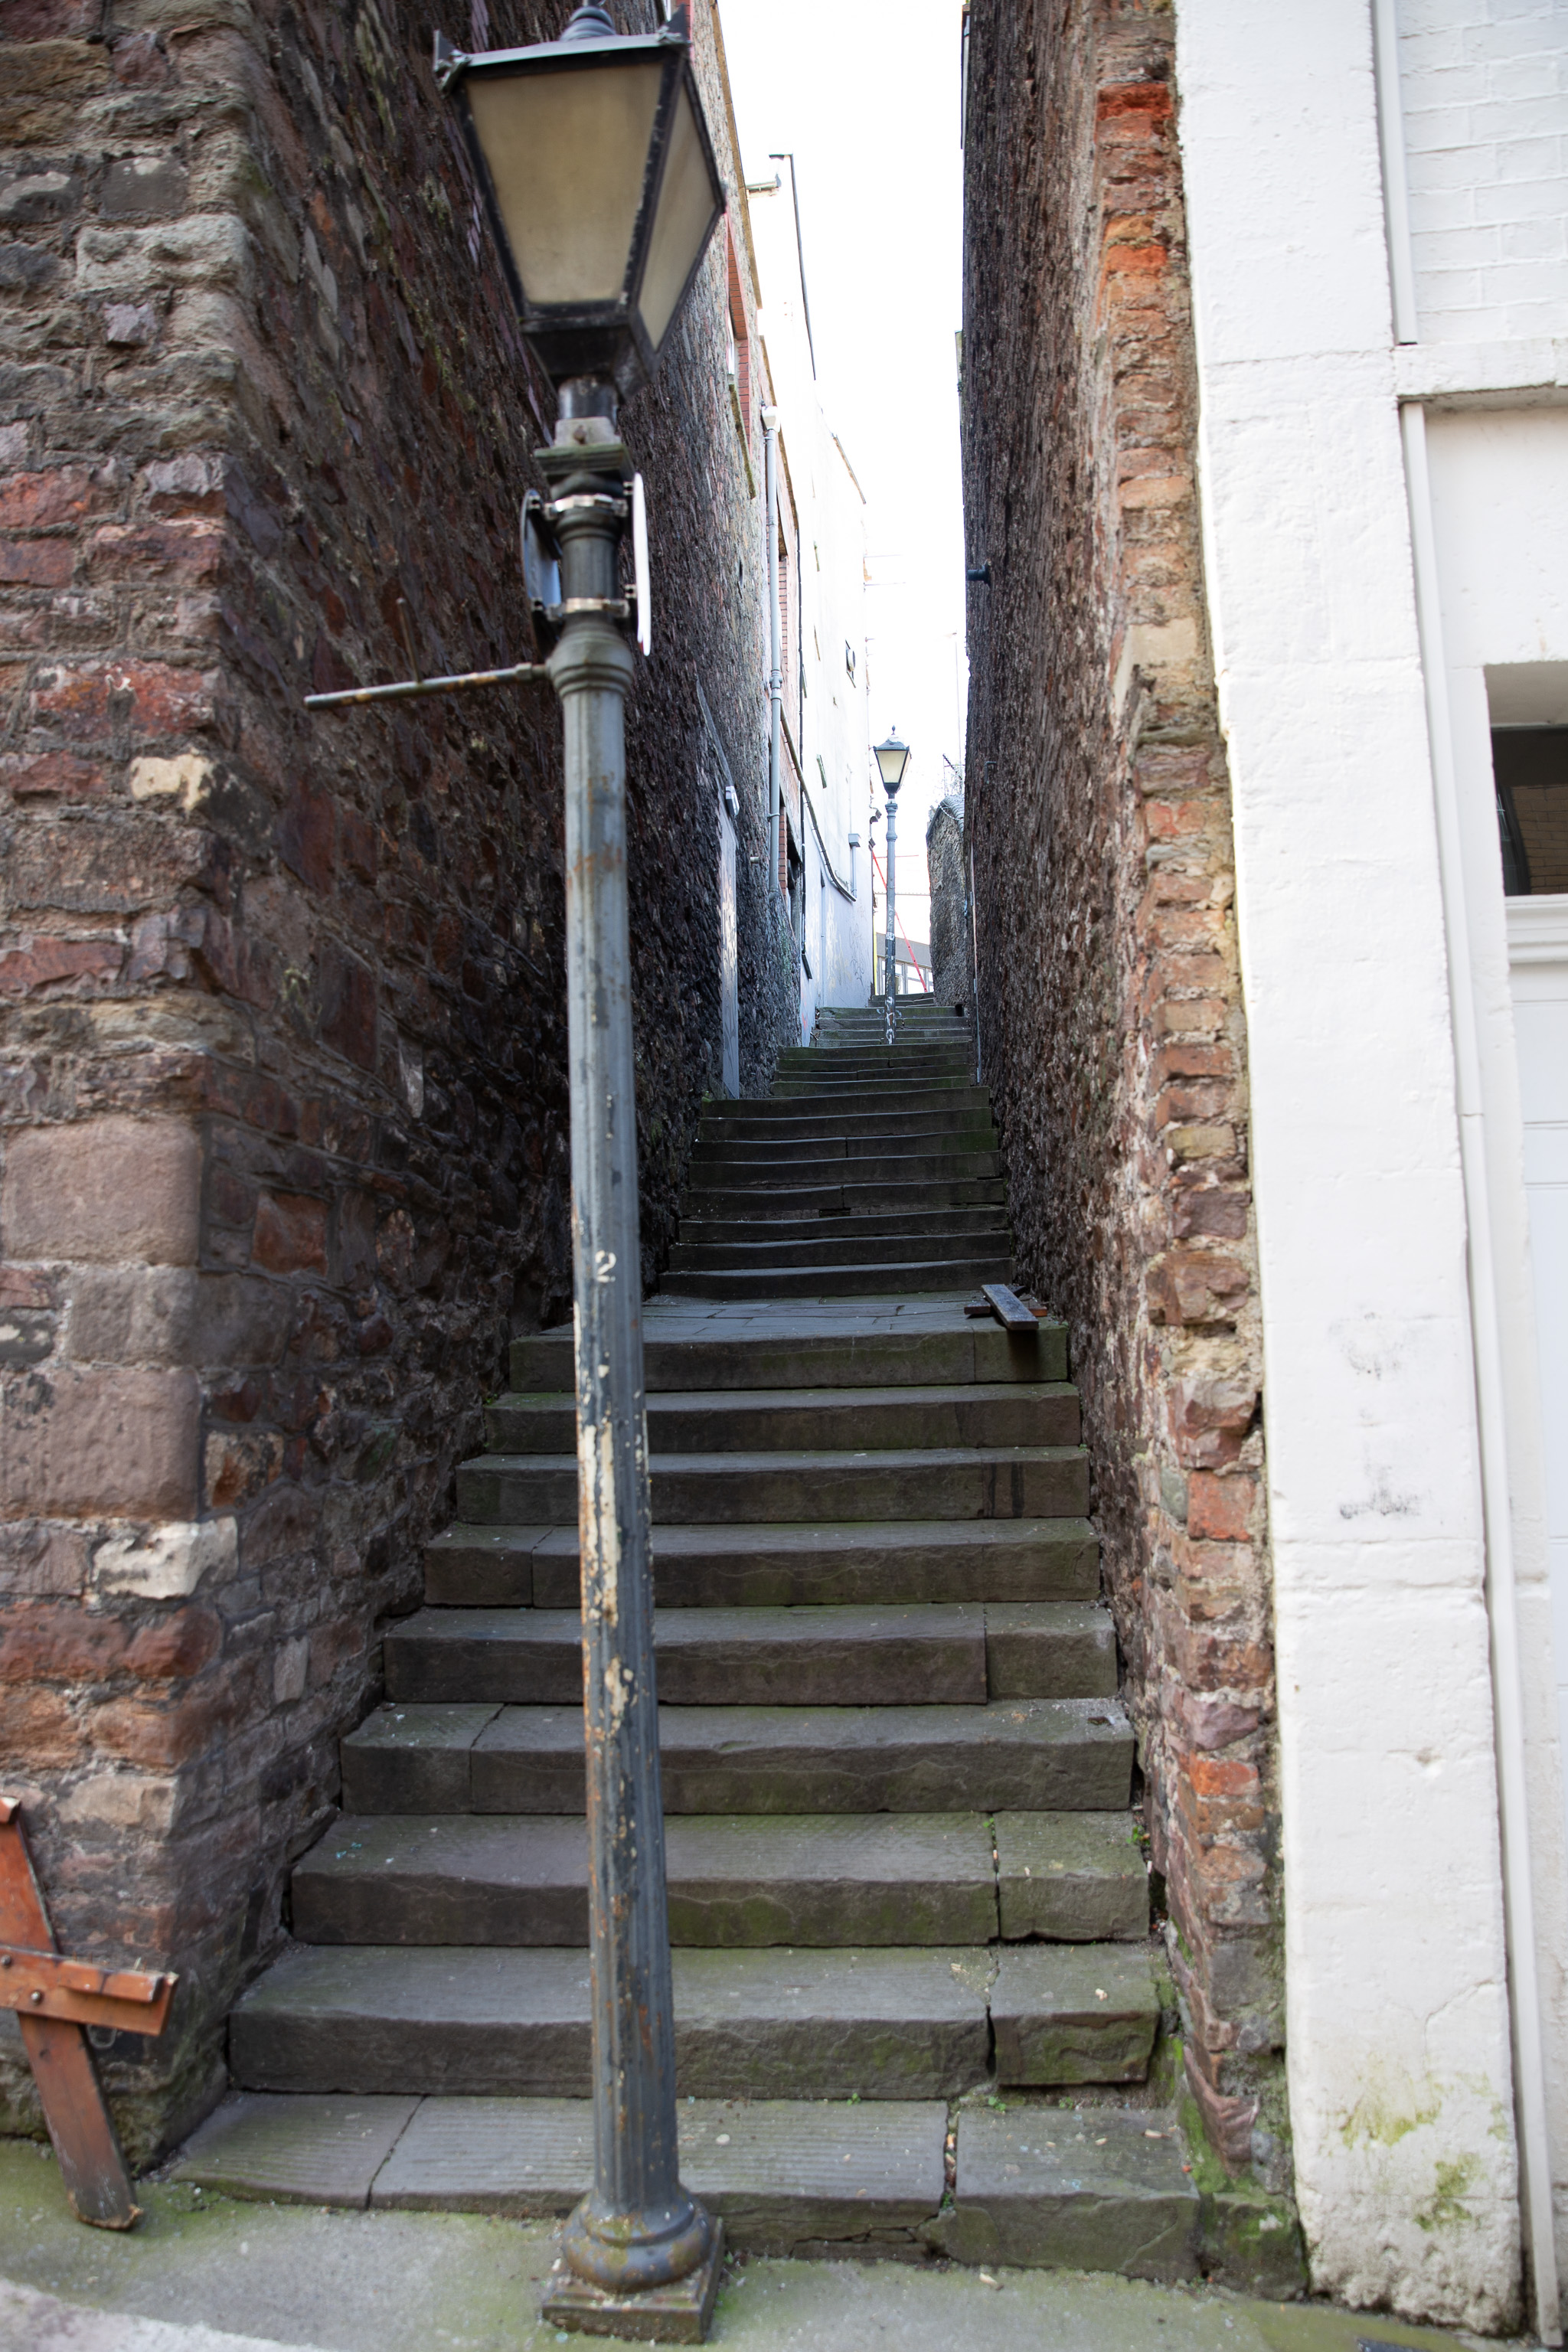 Zed Alley
This is one of Bristol's more strangely-named pathways: Zed Alley. It crosses Host Street here and continues down steps on the opposite side, conne...